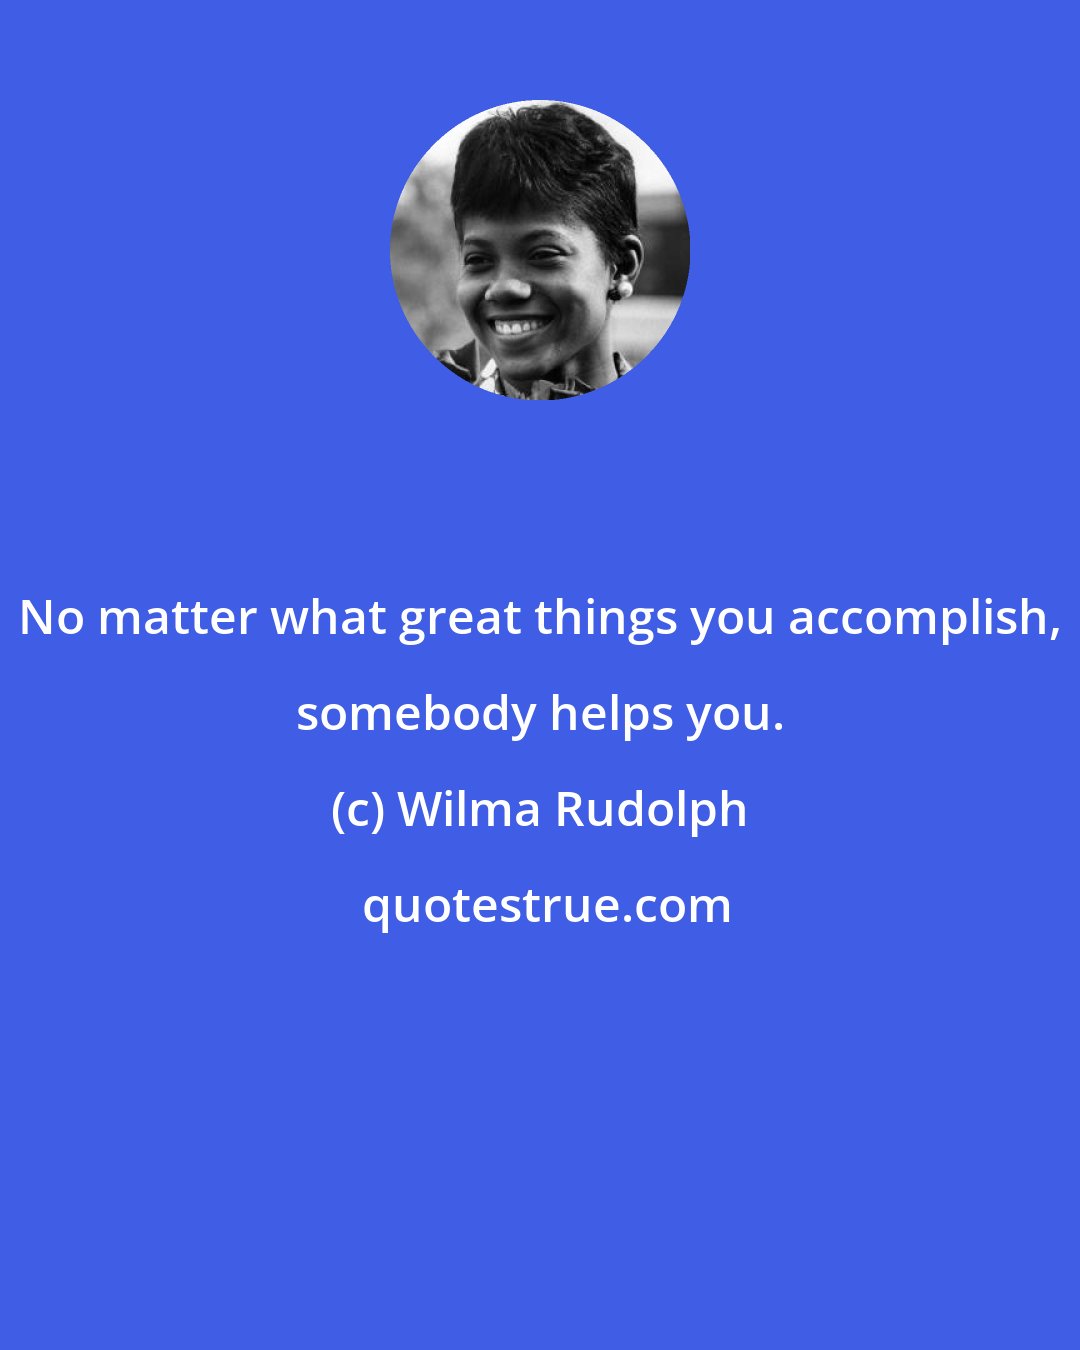 Wilma Rudolph: No matter what great things you accomplish, somebody helps you.